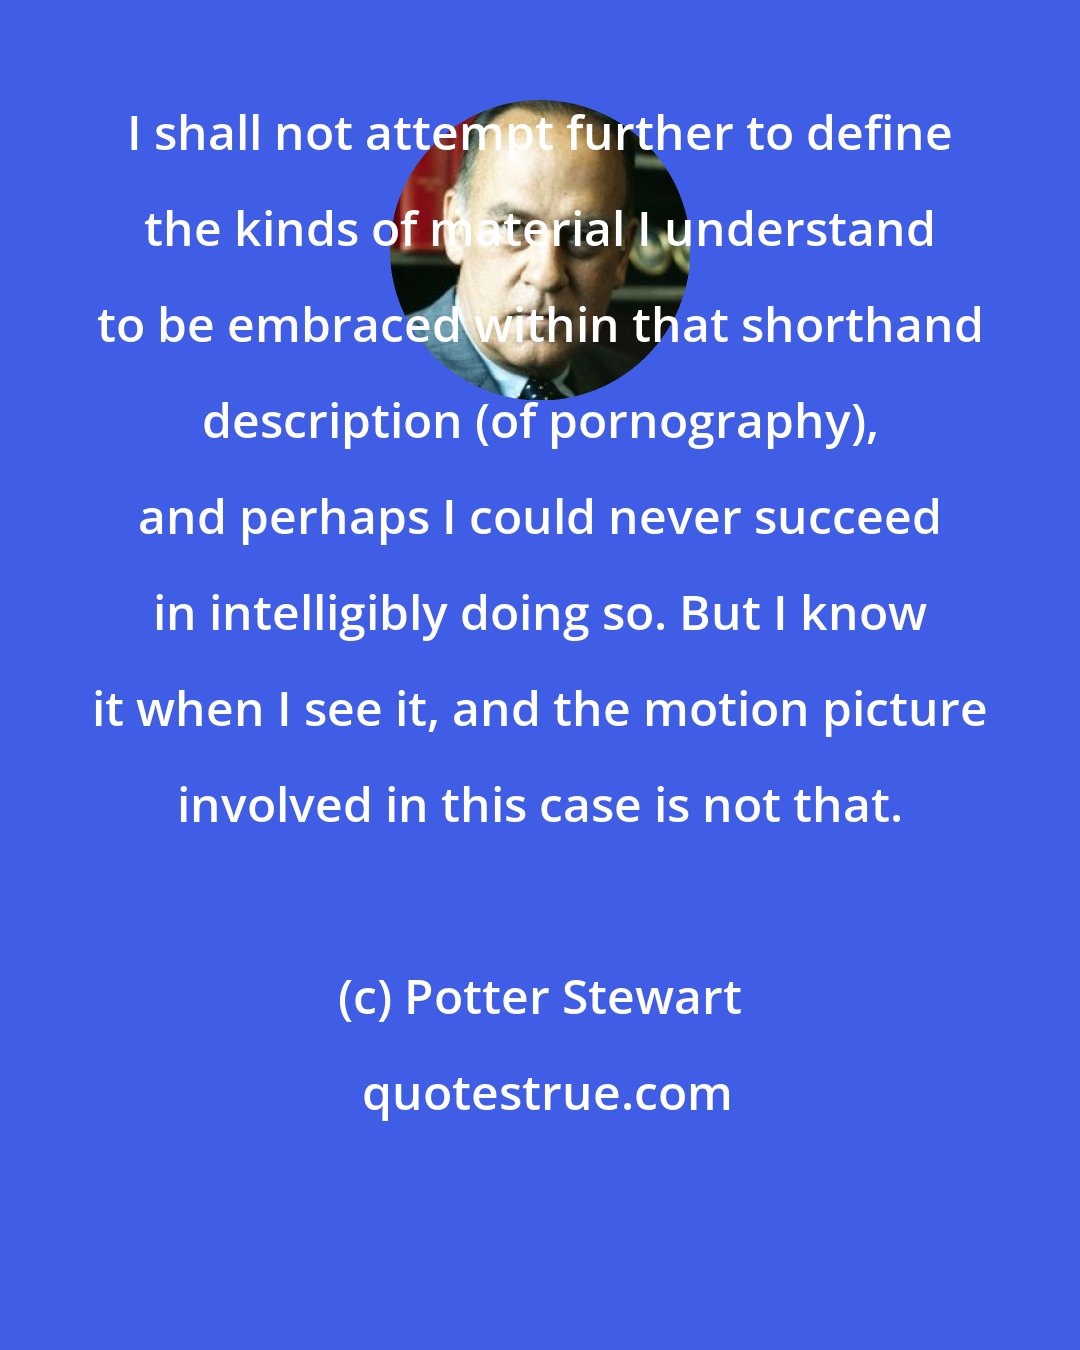 Potter Stewart: I shall not attempt further to define the kinds of material I understand to be embraced within that shorthand description (of pornography), and perhaps I could never succeed in intelligibly doing so. But I know it when I see it, and the motion picture involved in this case is not that.